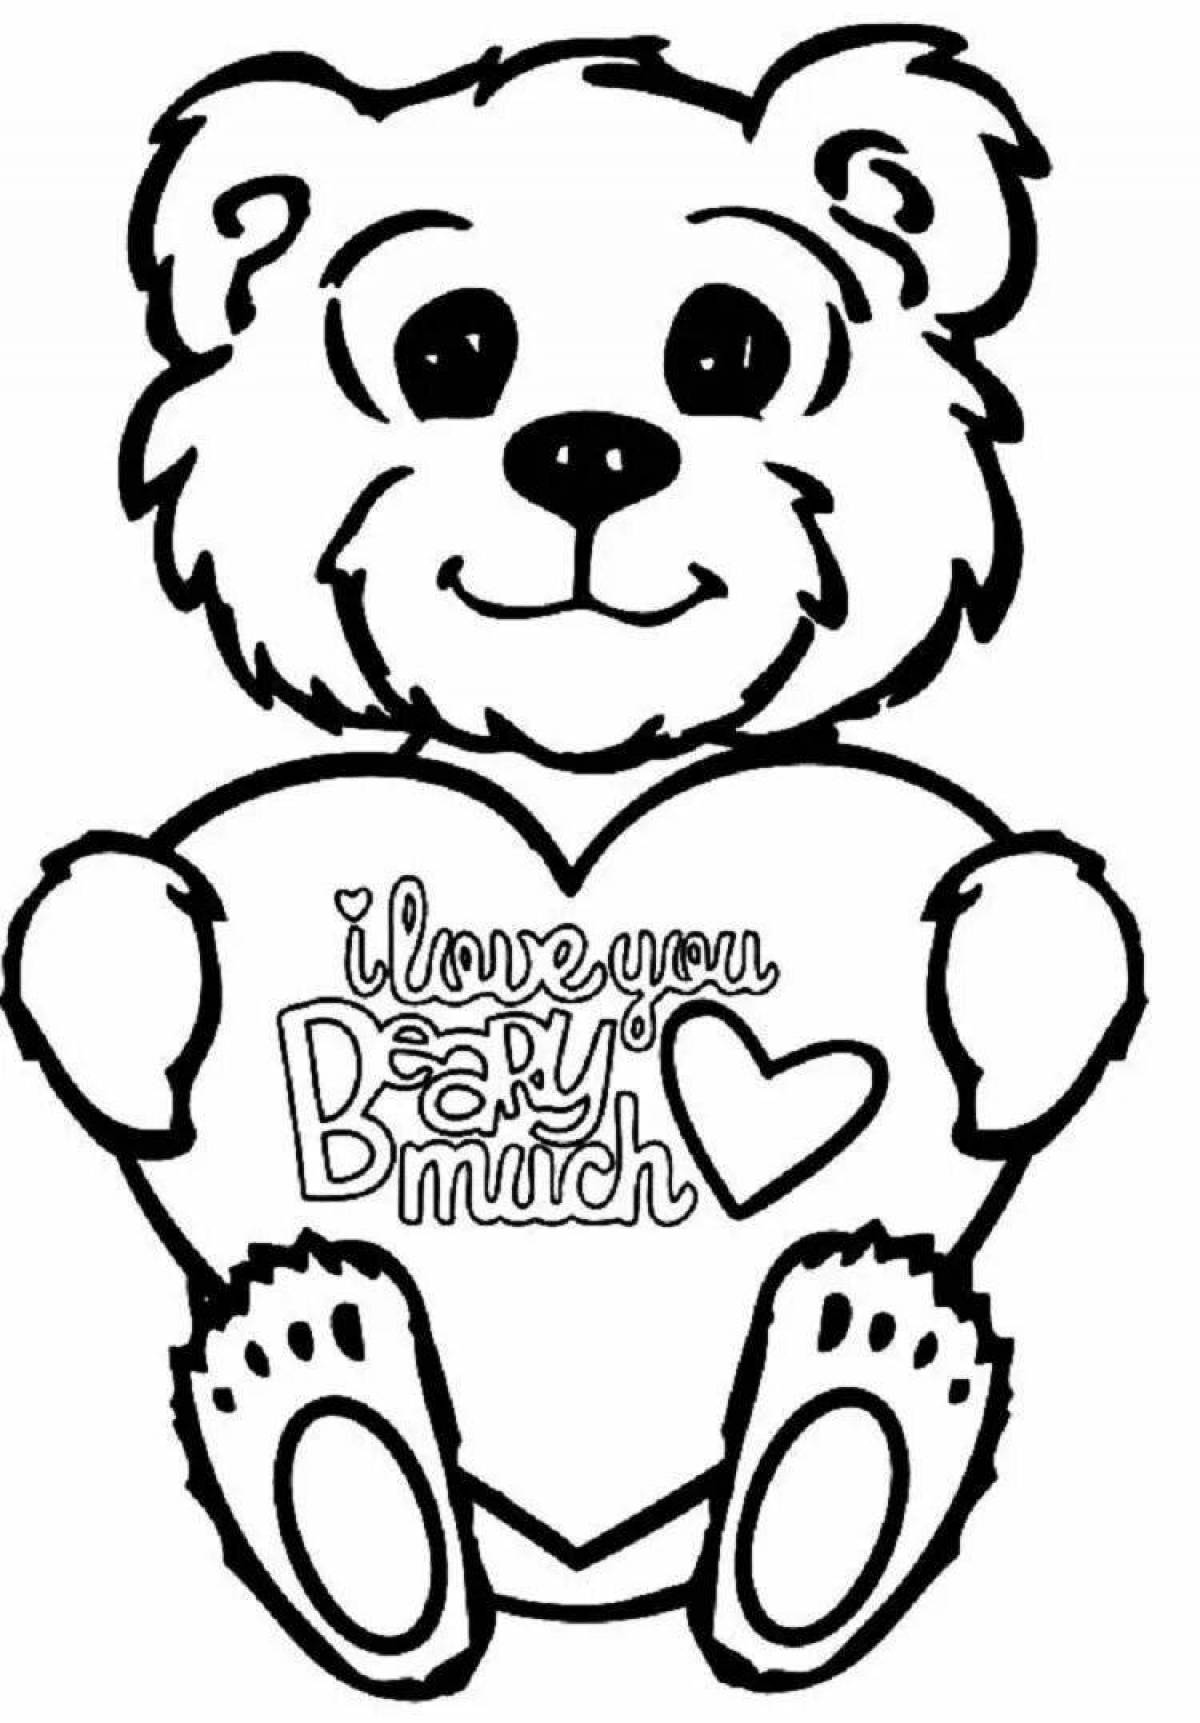 Coloring page cozy teddy bear with a heart